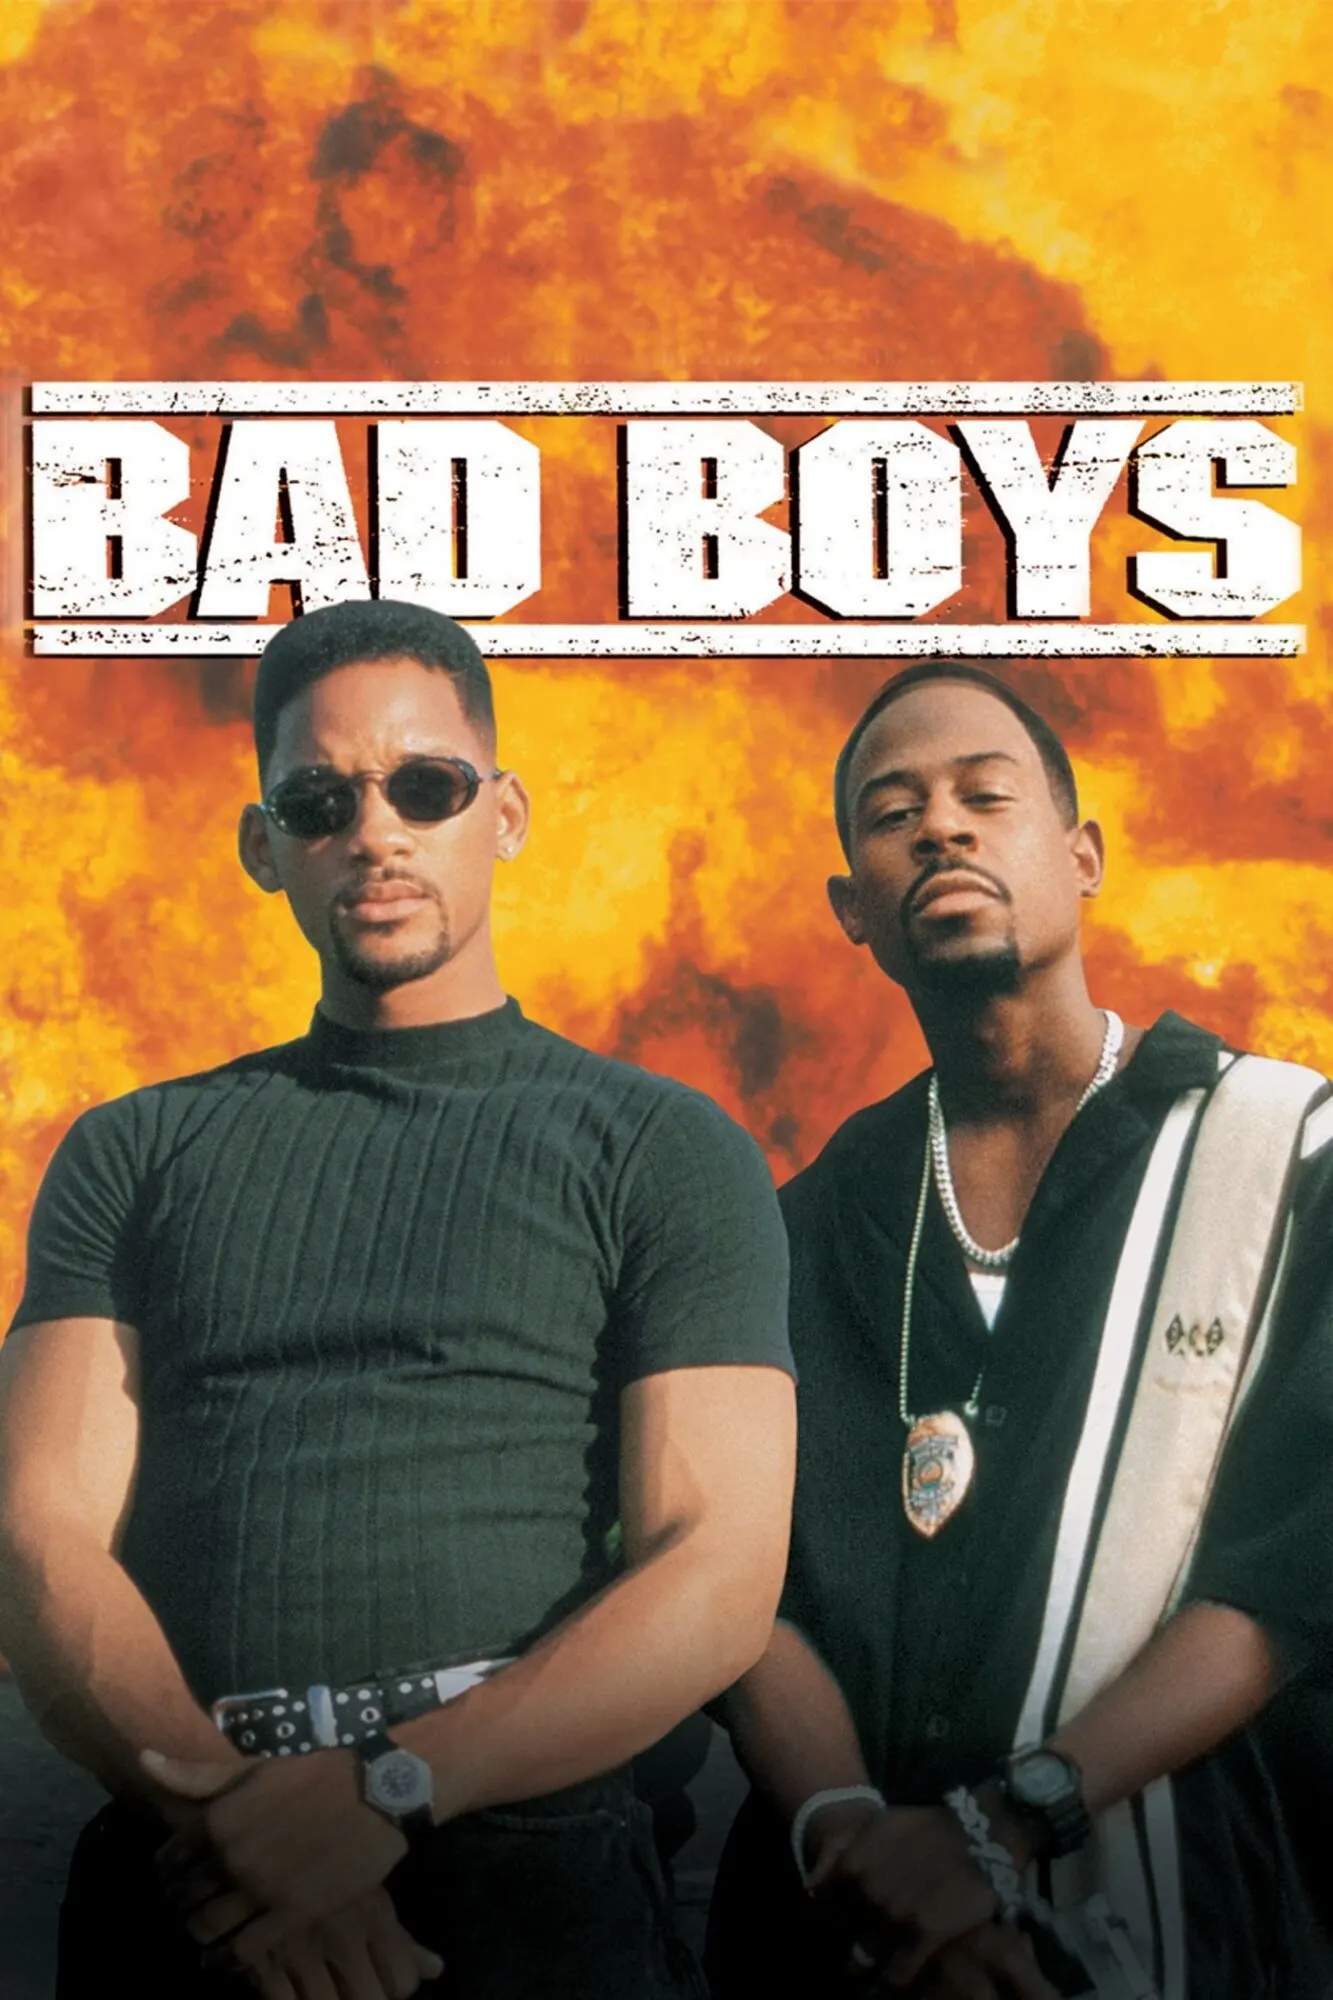 Just How Bad Were the 'Bad Boys'?